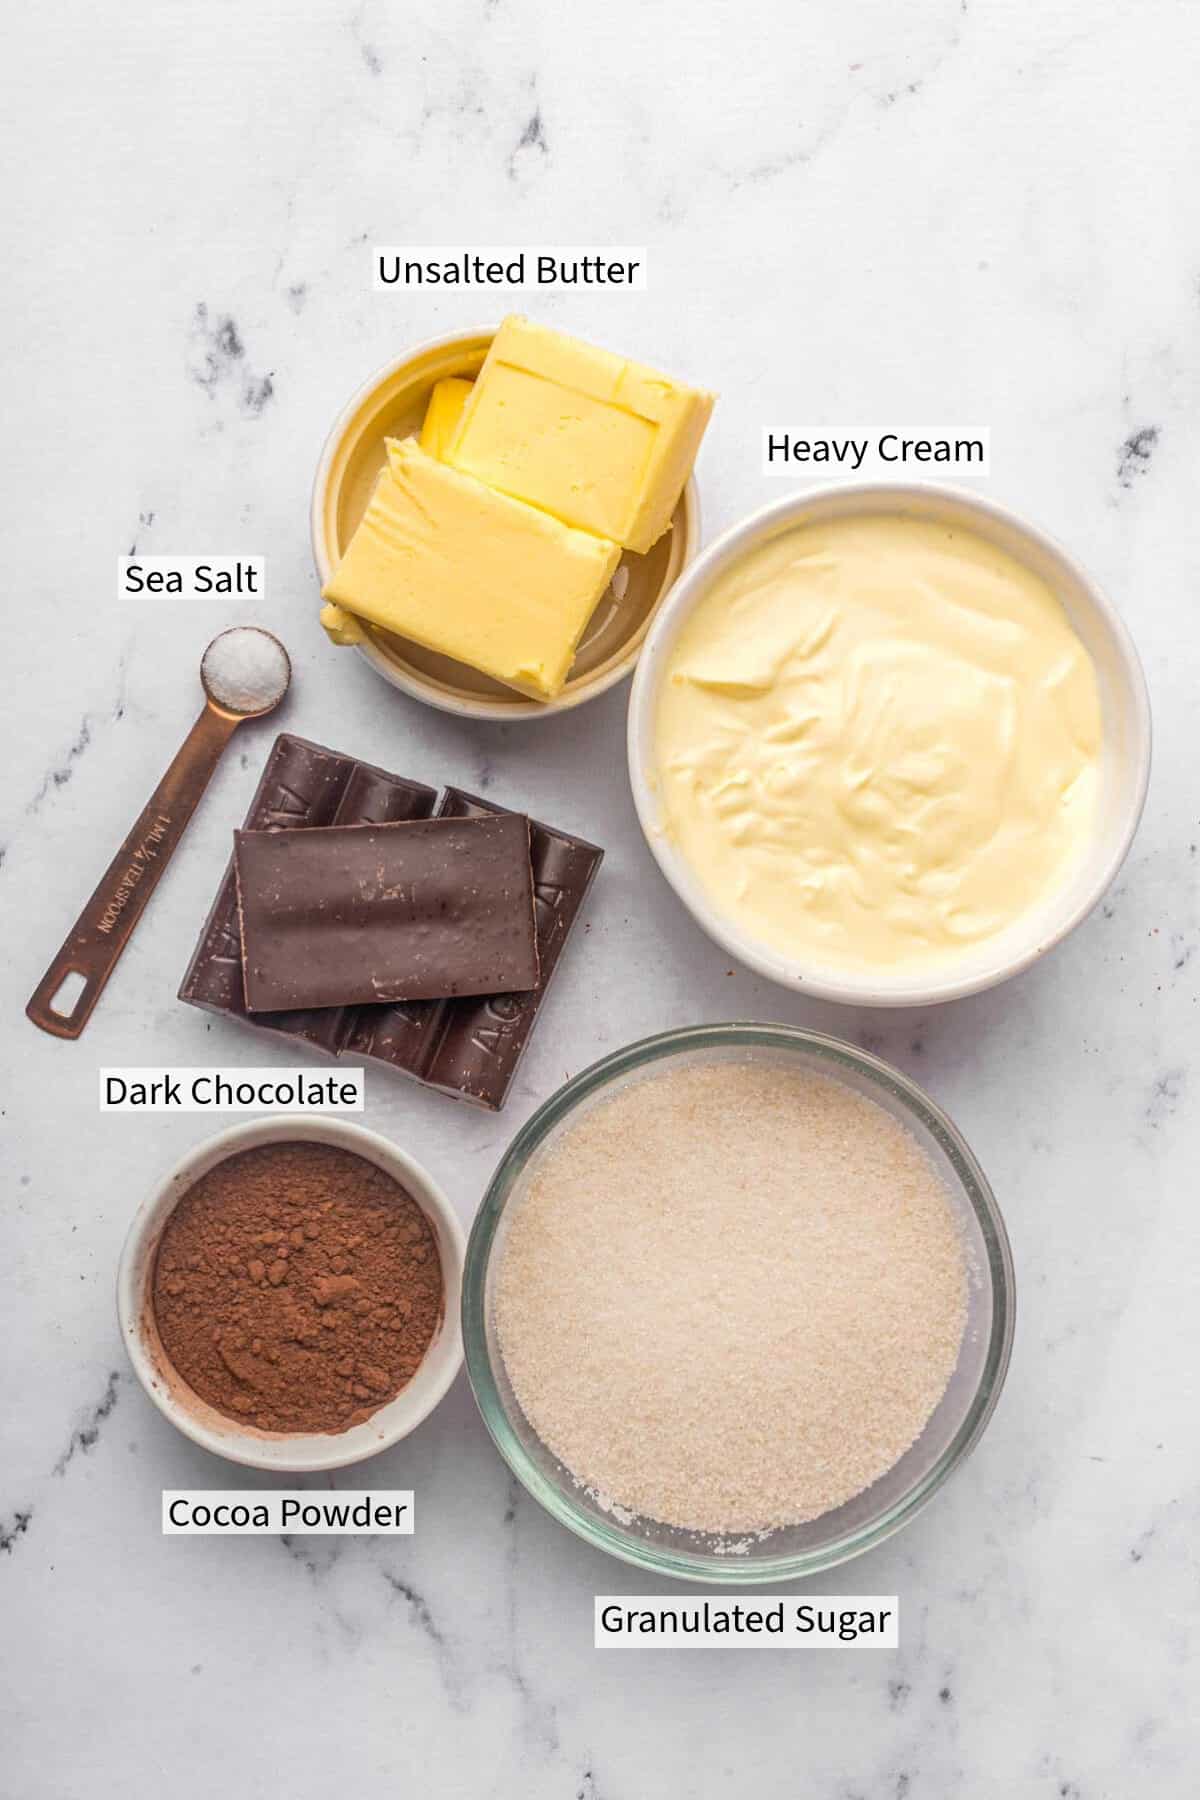 labelled ingredients for chocolate fudge frosting placed on a marble countertop.